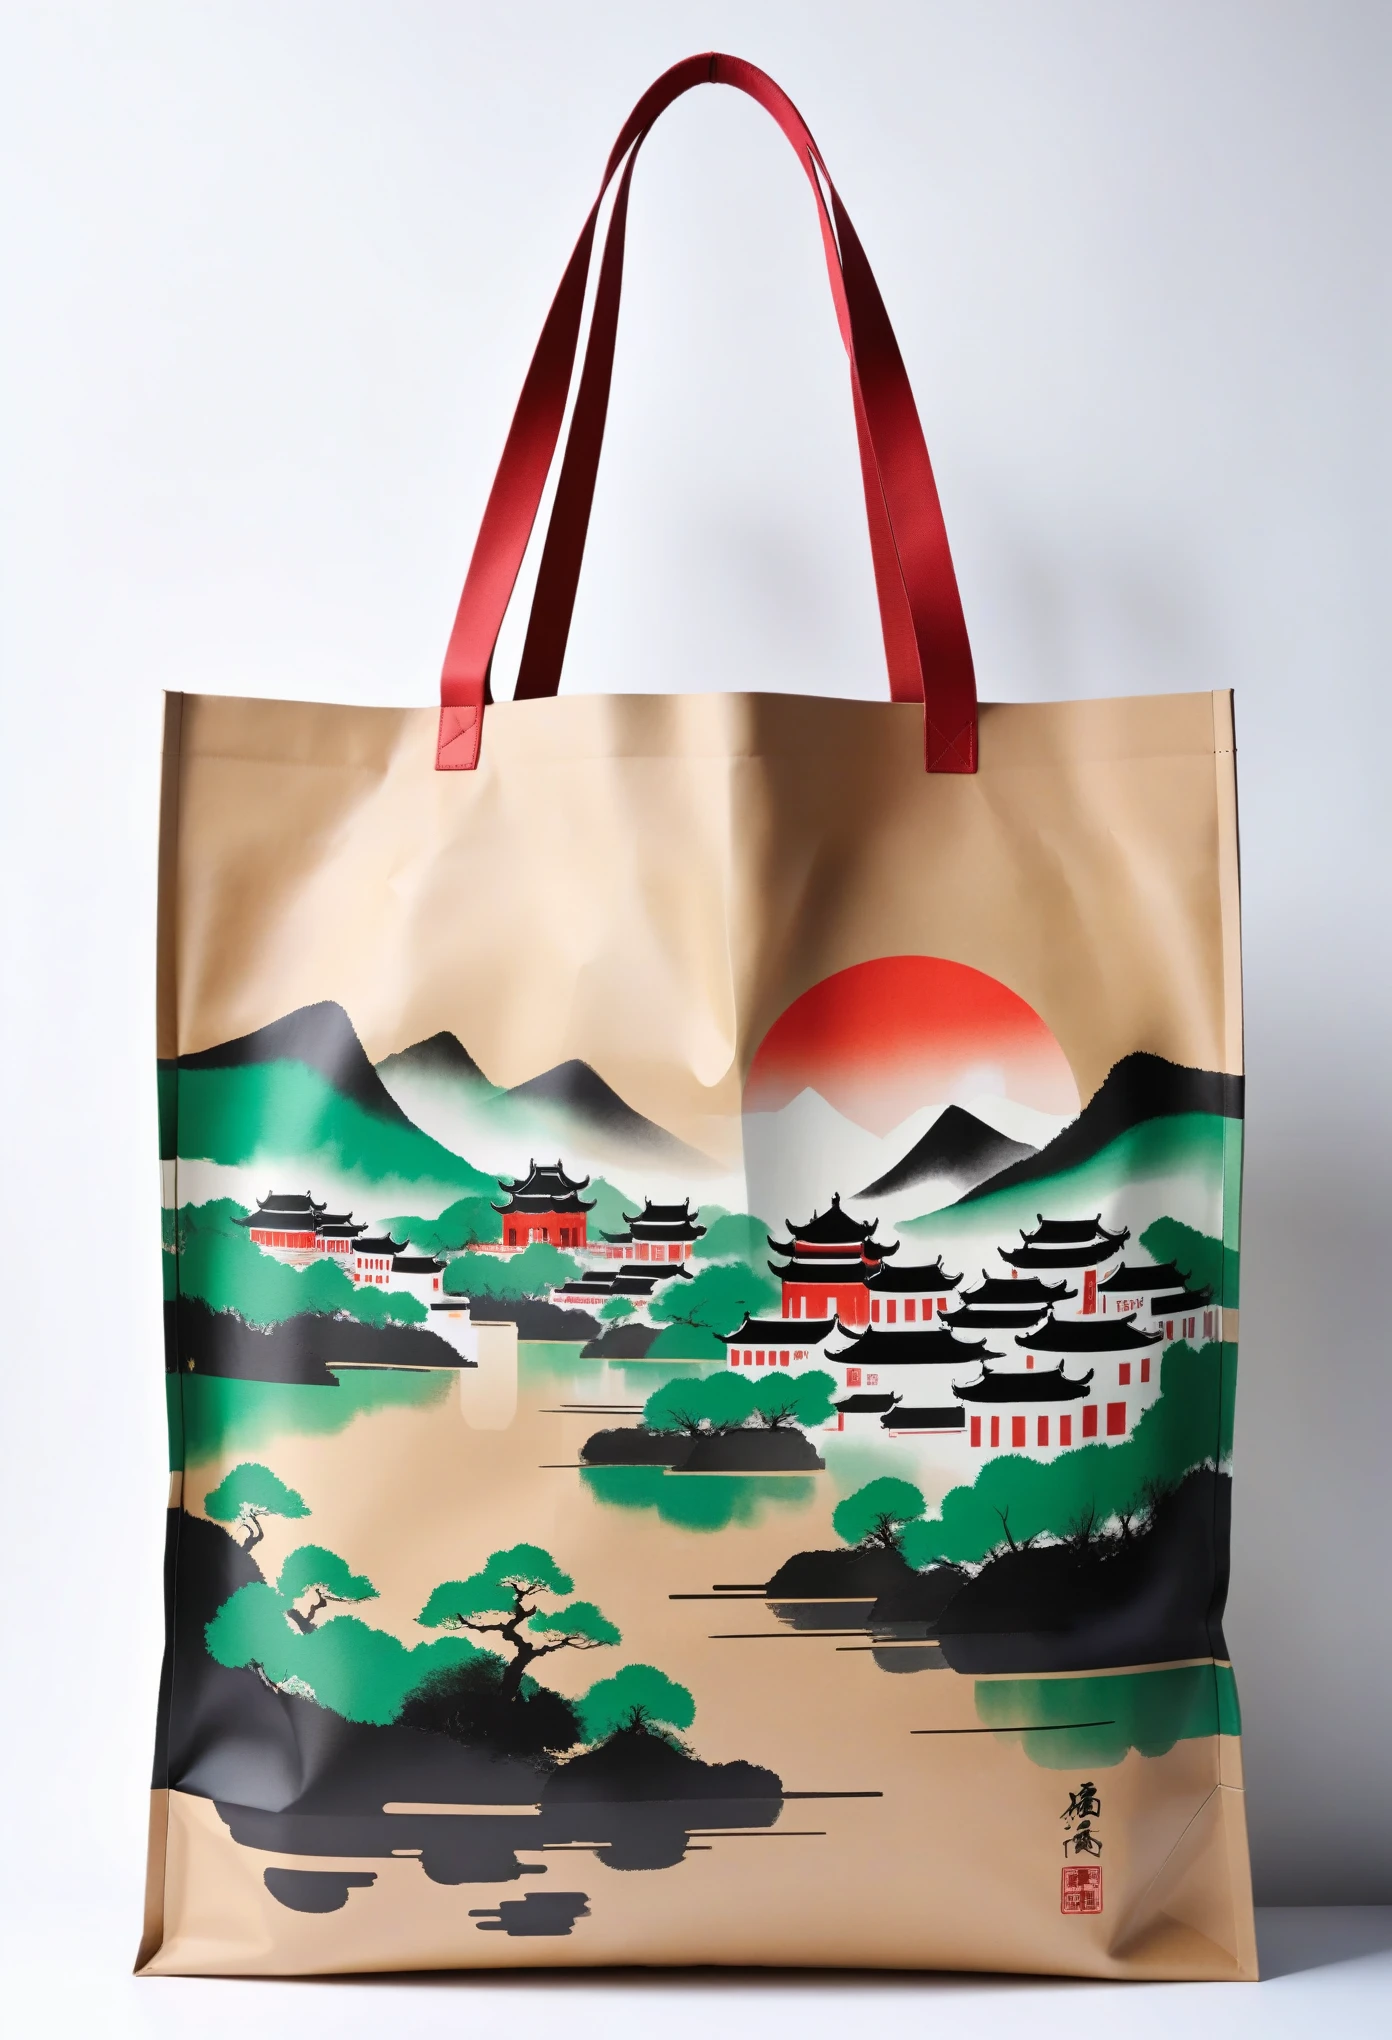 Kraft paper tote bag，printing：Geometric abstract ink，Describe the Jiangnan landscape architectural complex，Wu Guanzhong's style is an artistic expression that merges traditional Chinese ink techniques with Western painting concepts. It is characterized by modern interpretations of traditional themes, creating unique visual effects through color and line.